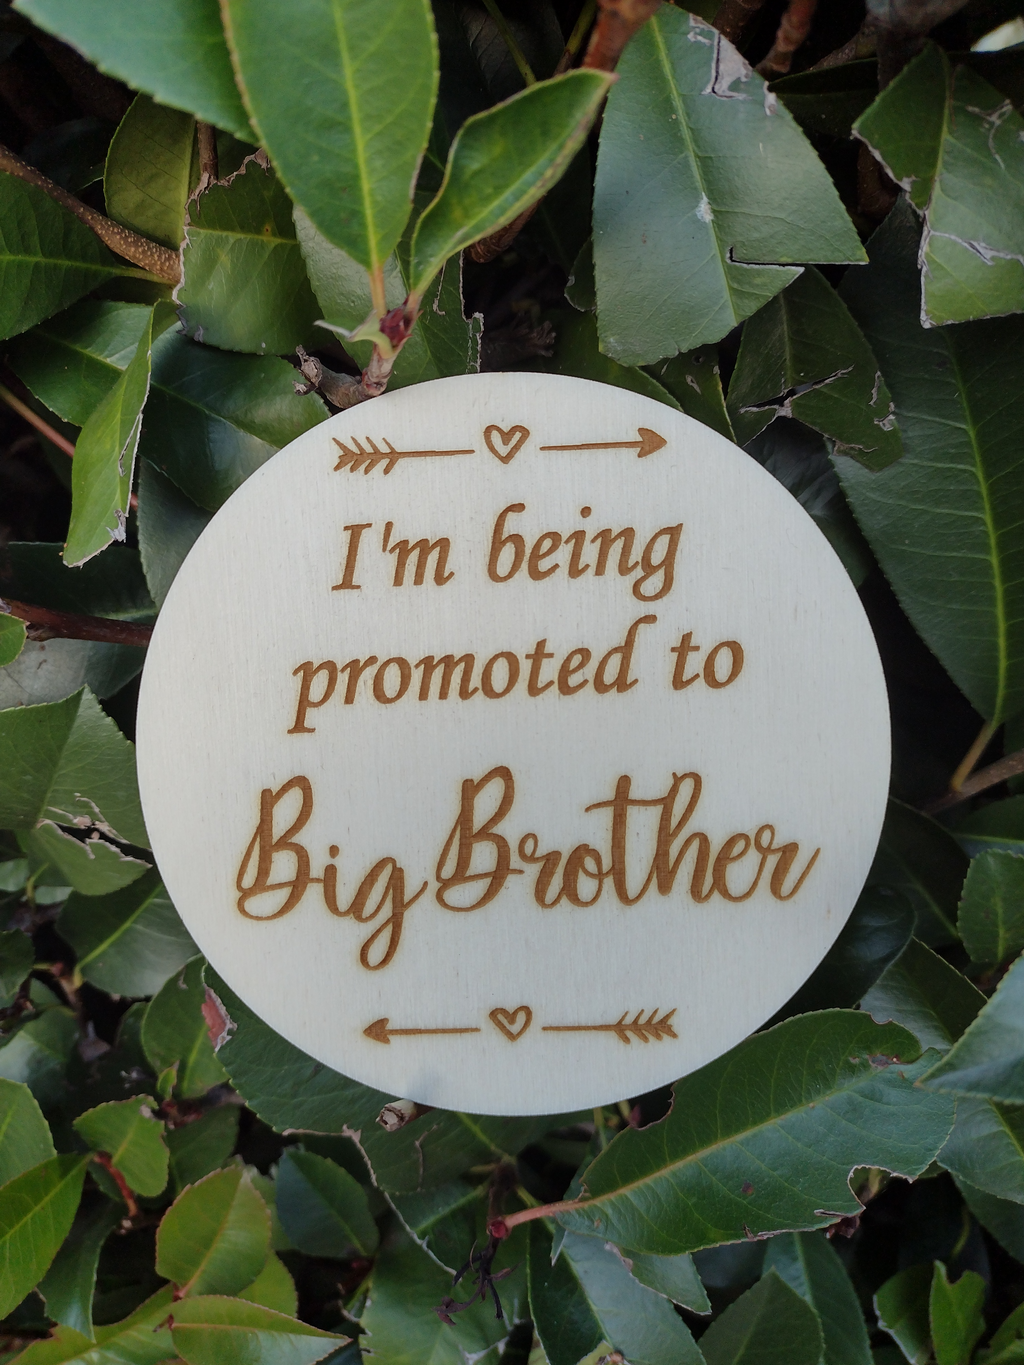 Promoted to big brother - Craftyroo